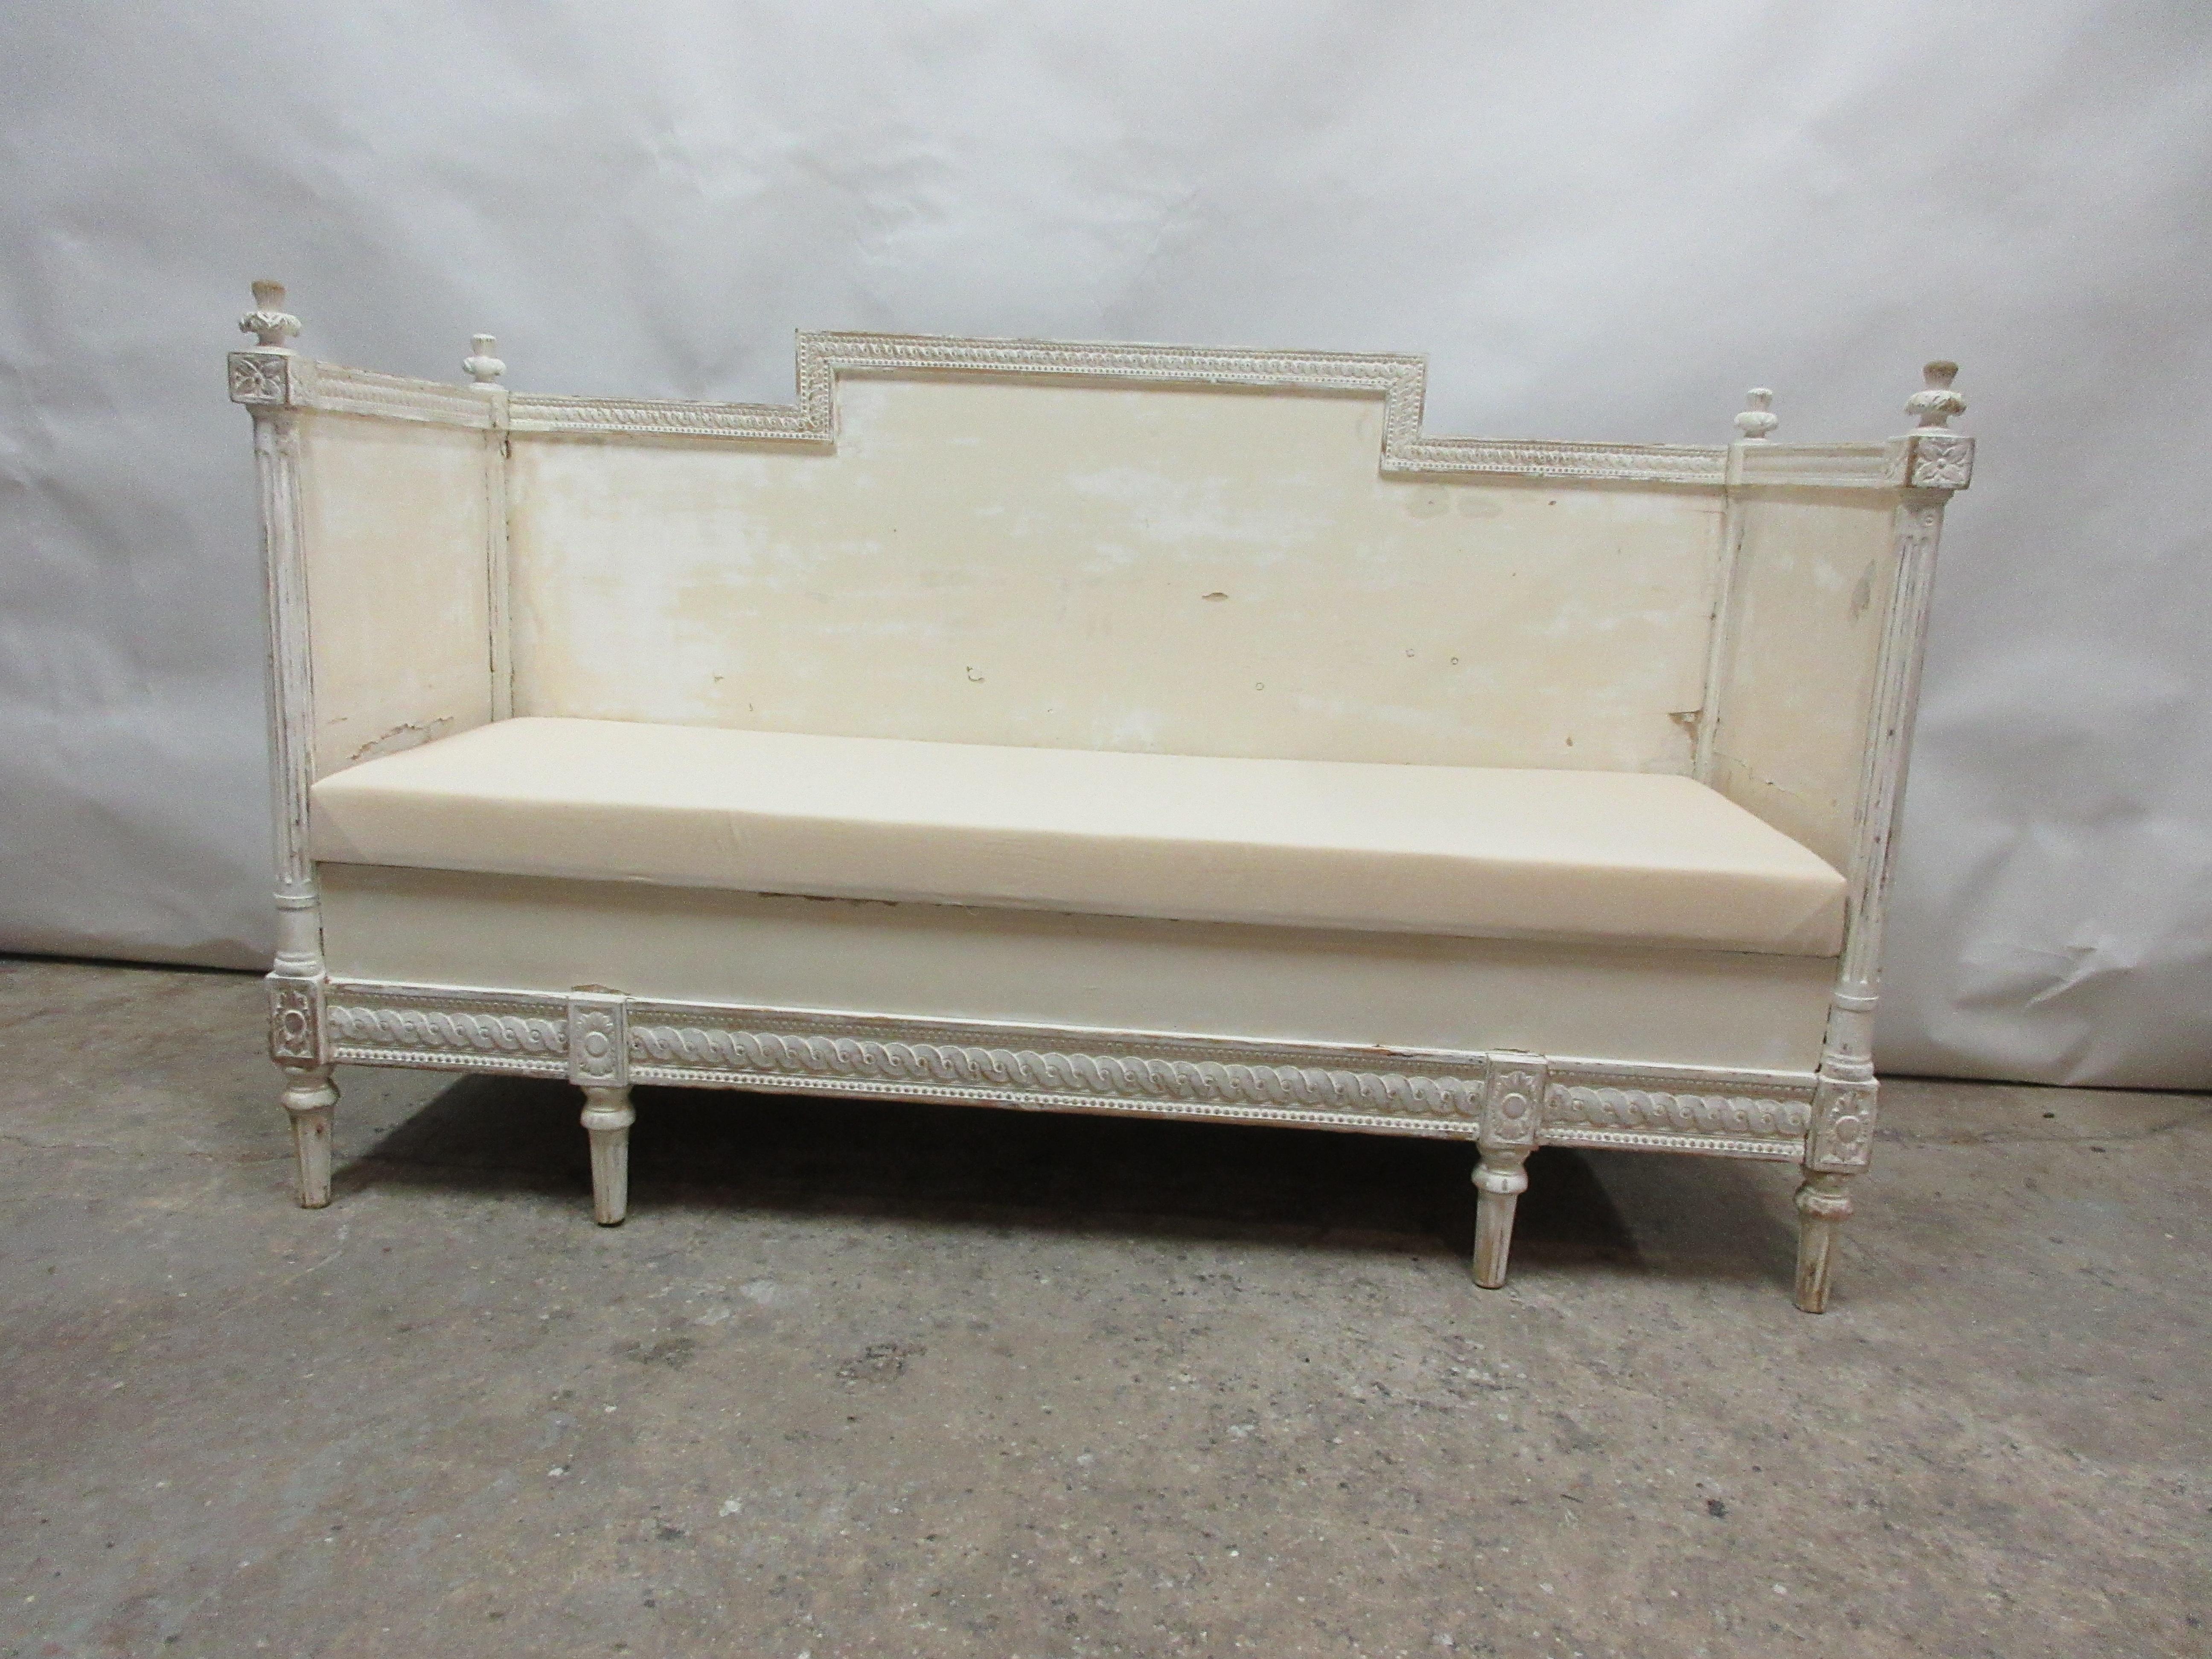 This is a 100% original finish Swedish Gustavian sofa. seating has been restored and covered in muslin.